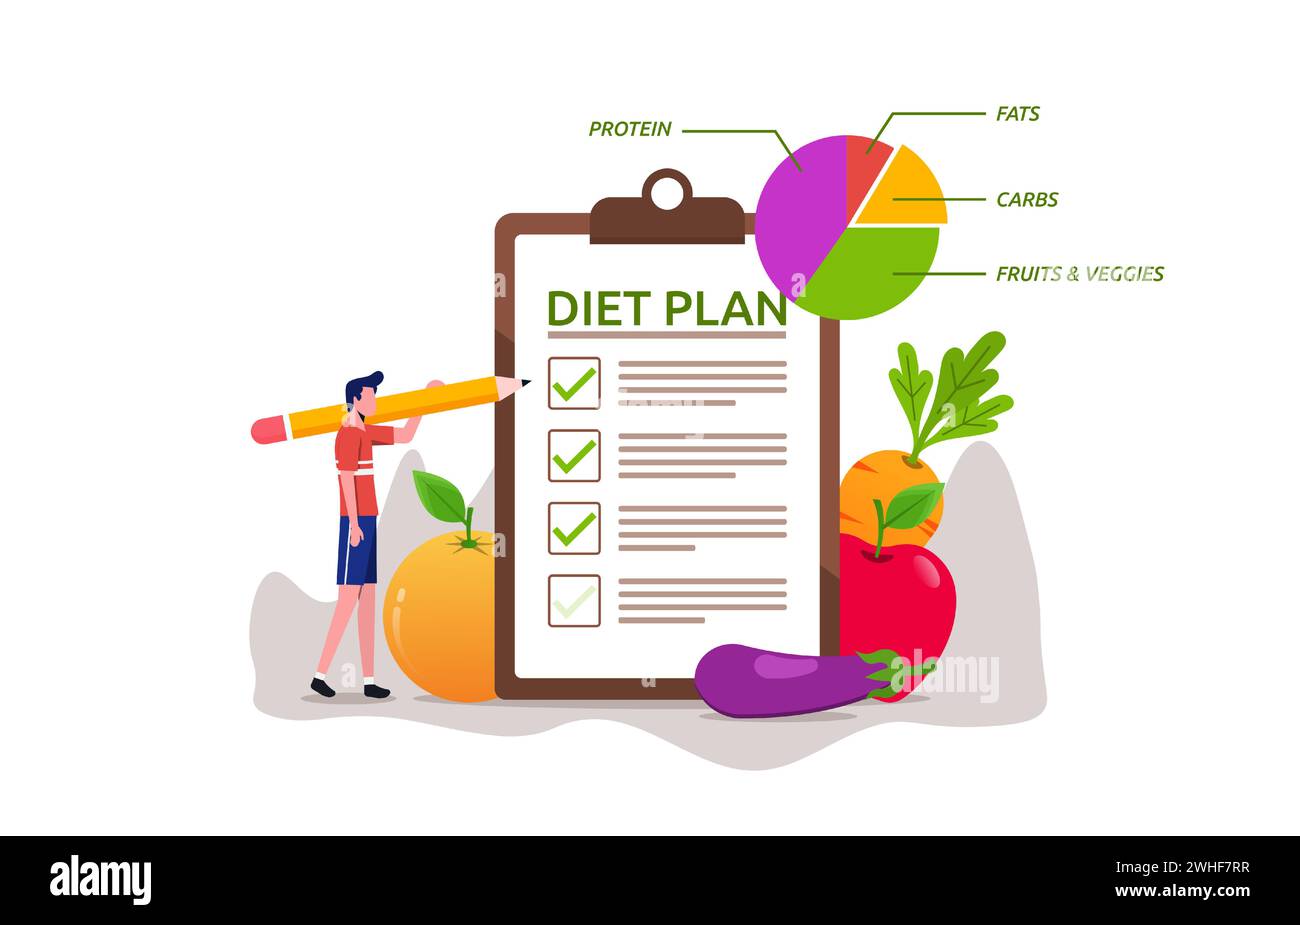 Healthy food diet planning for body ad mental health. Nutrition weight loss diet, healthy lifestyle for overall wellness Stock Vector